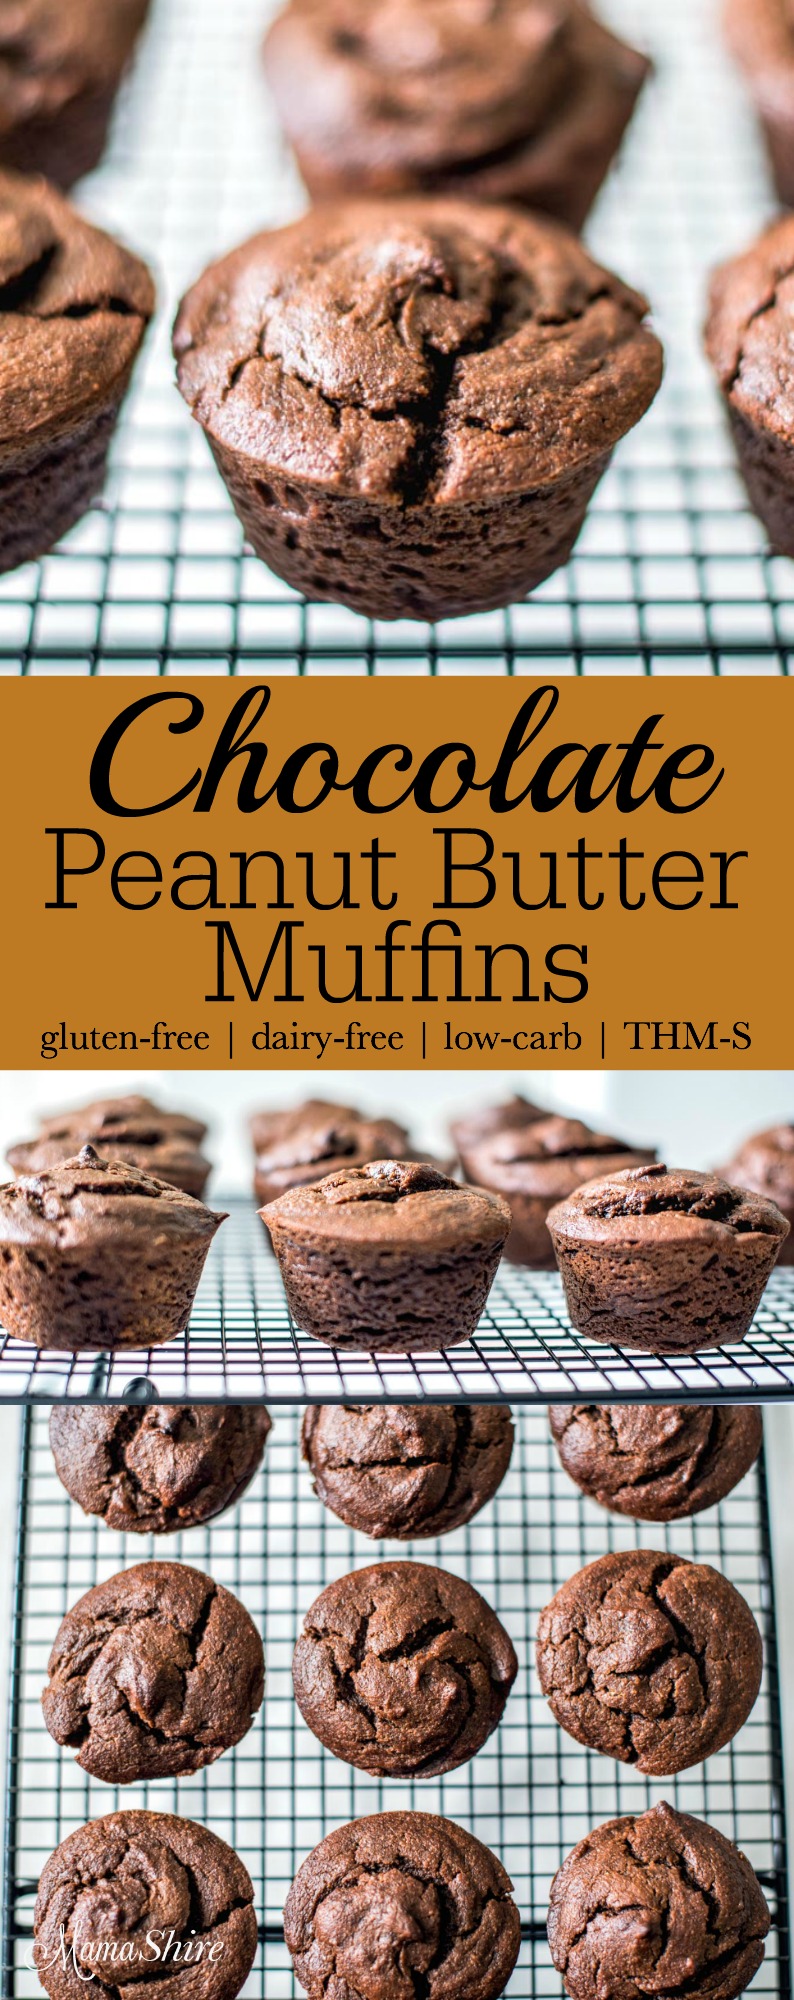 Chocolate Peanut Butter Muffins with summer squash. Gluten-free, dairy-free, sugar-free, low-carb, THM-S.